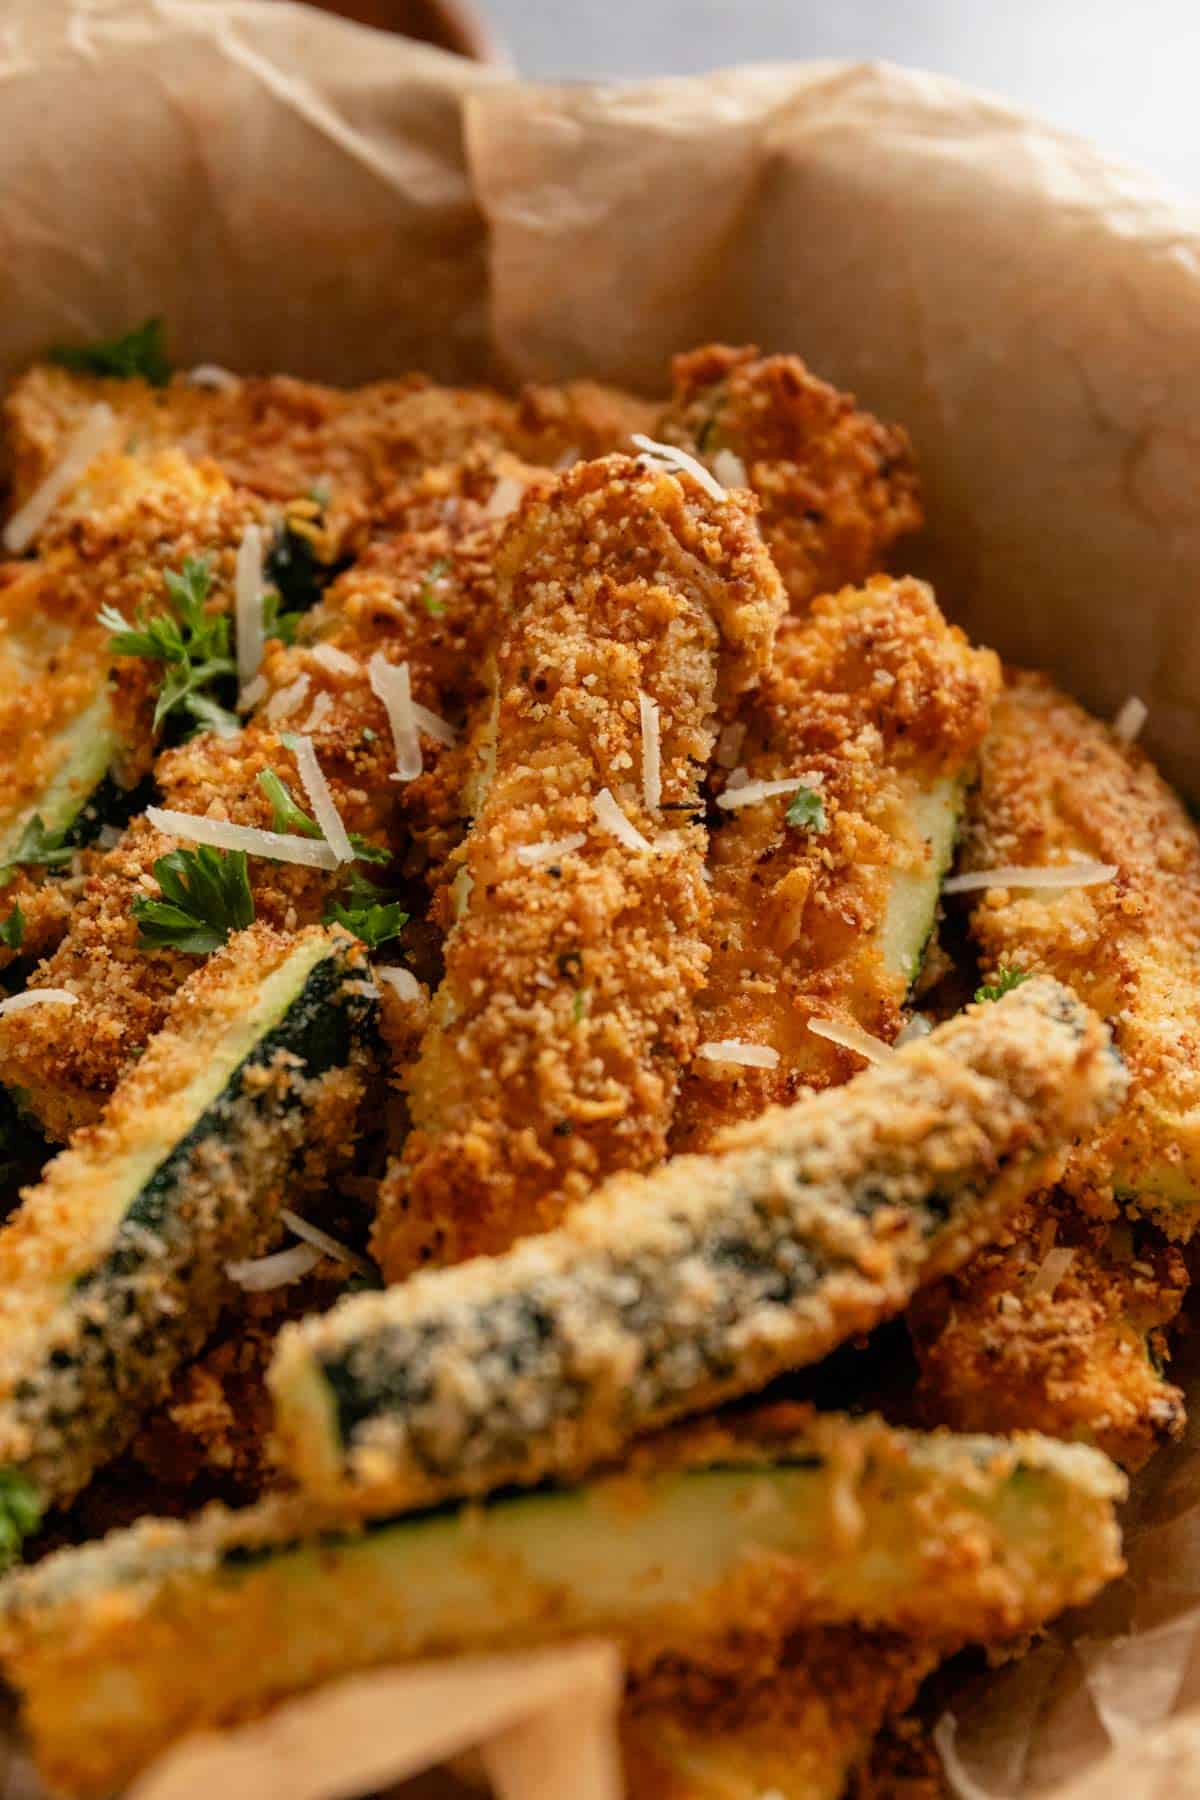 almond flour breaded zucchini fries in a bowl.